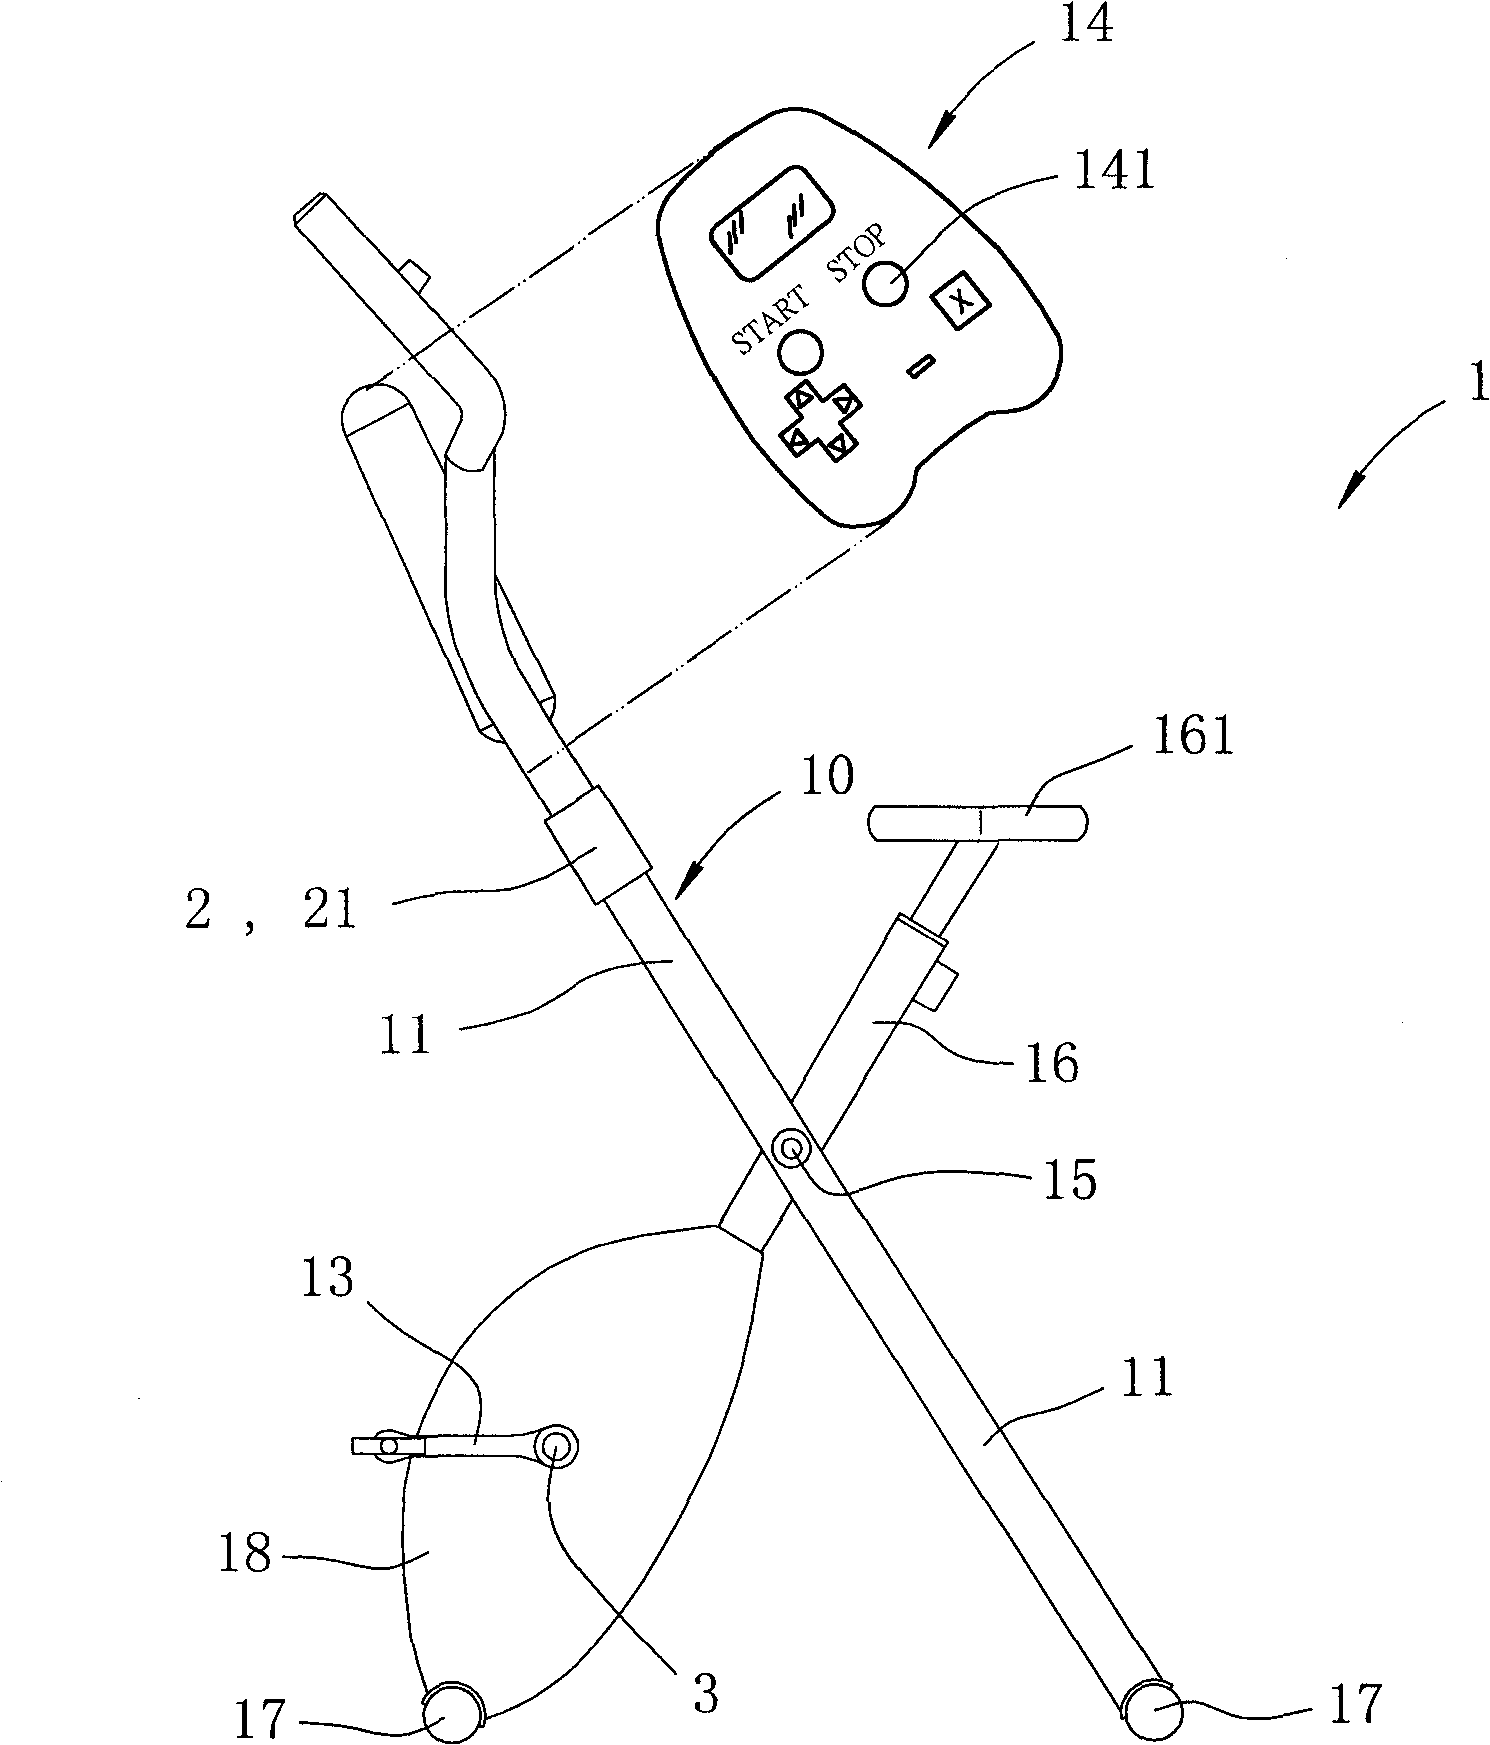 Body building vehicle device for game software